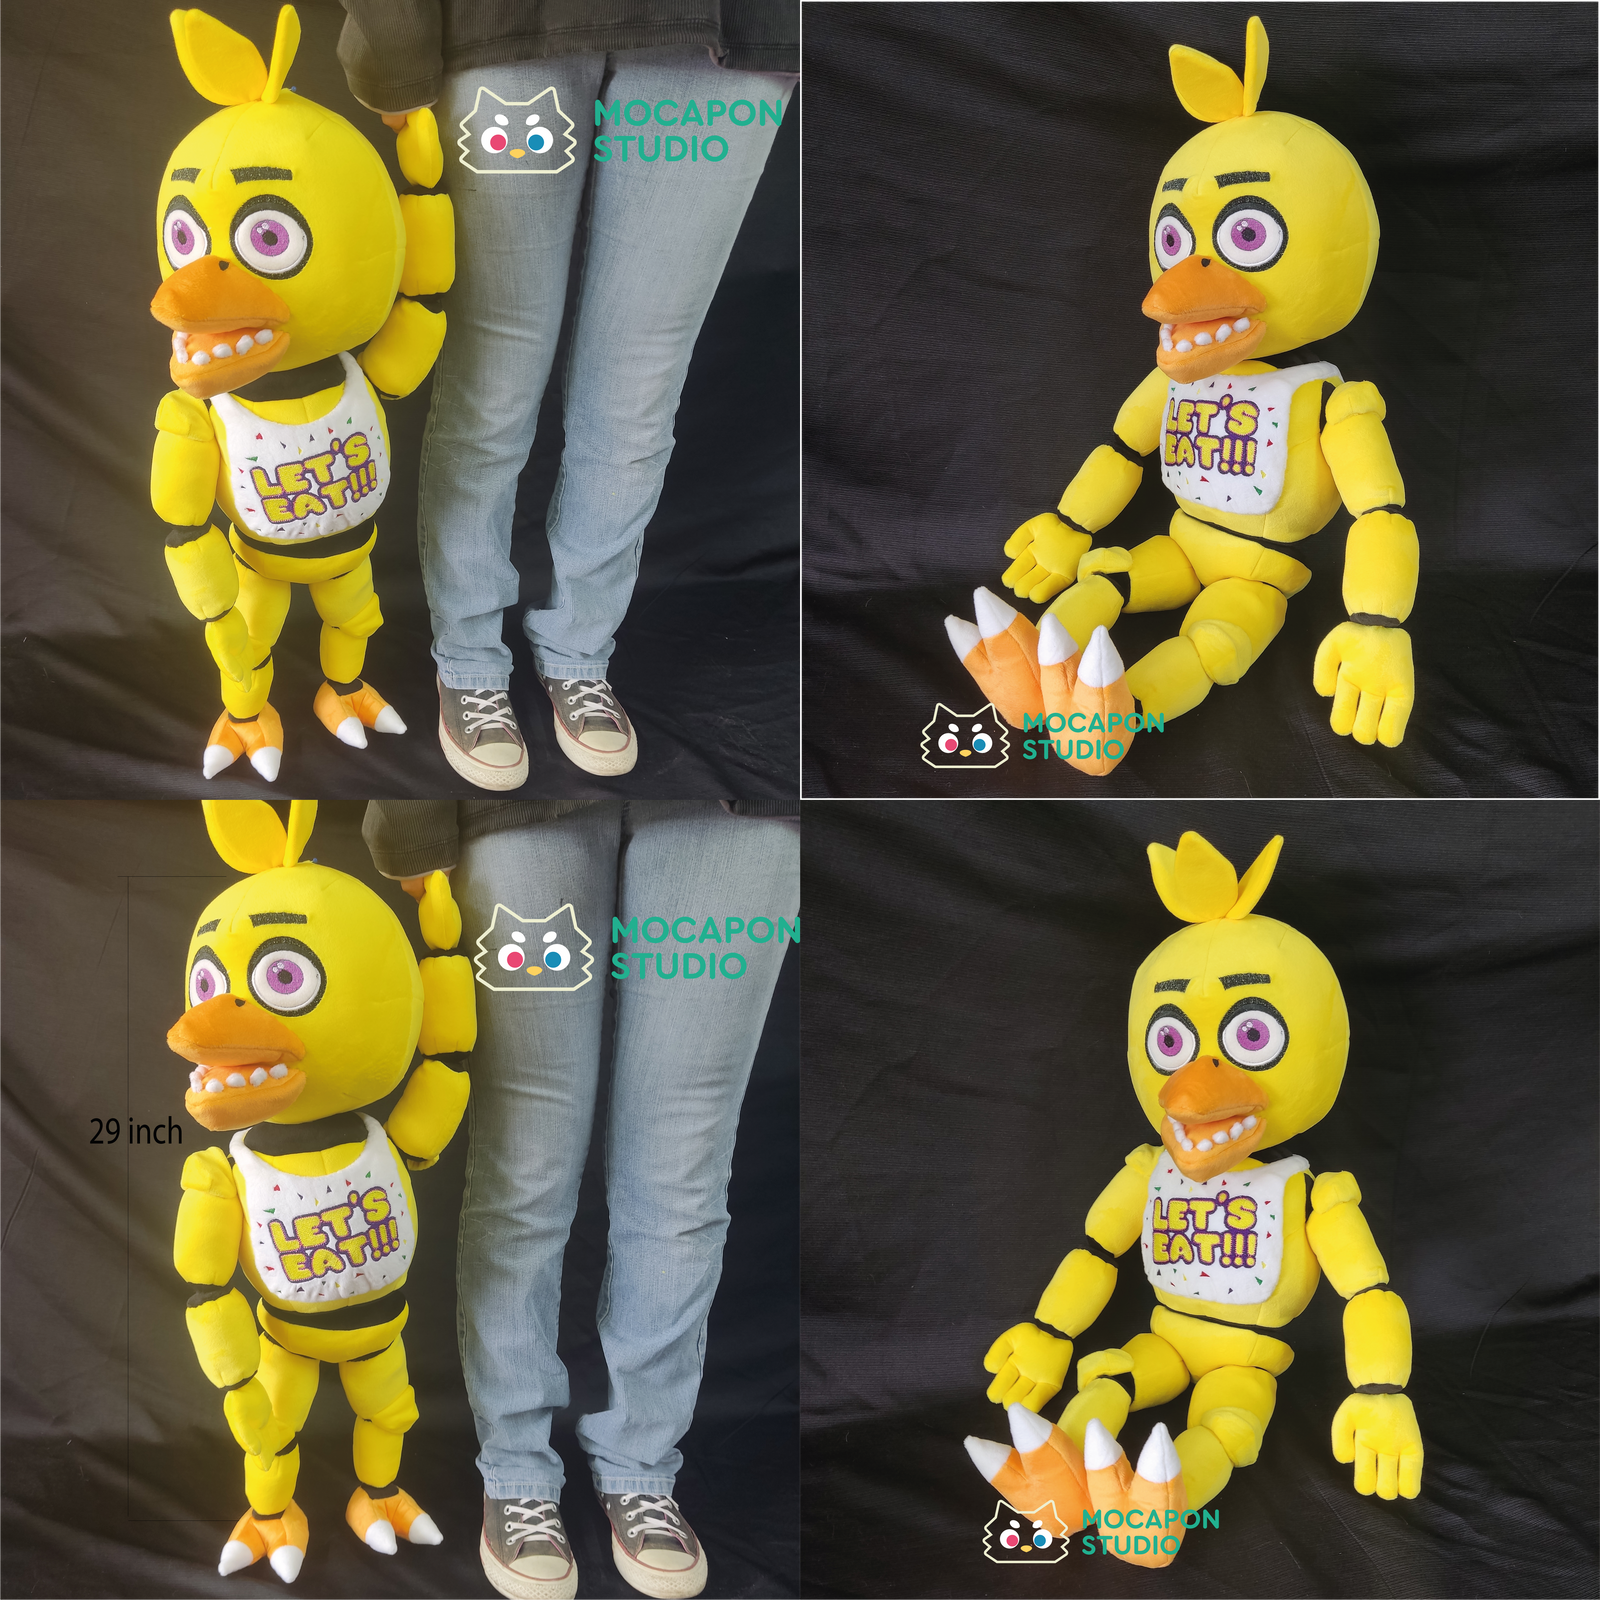 Five Nights At Freddy's 10 Plush: Chica